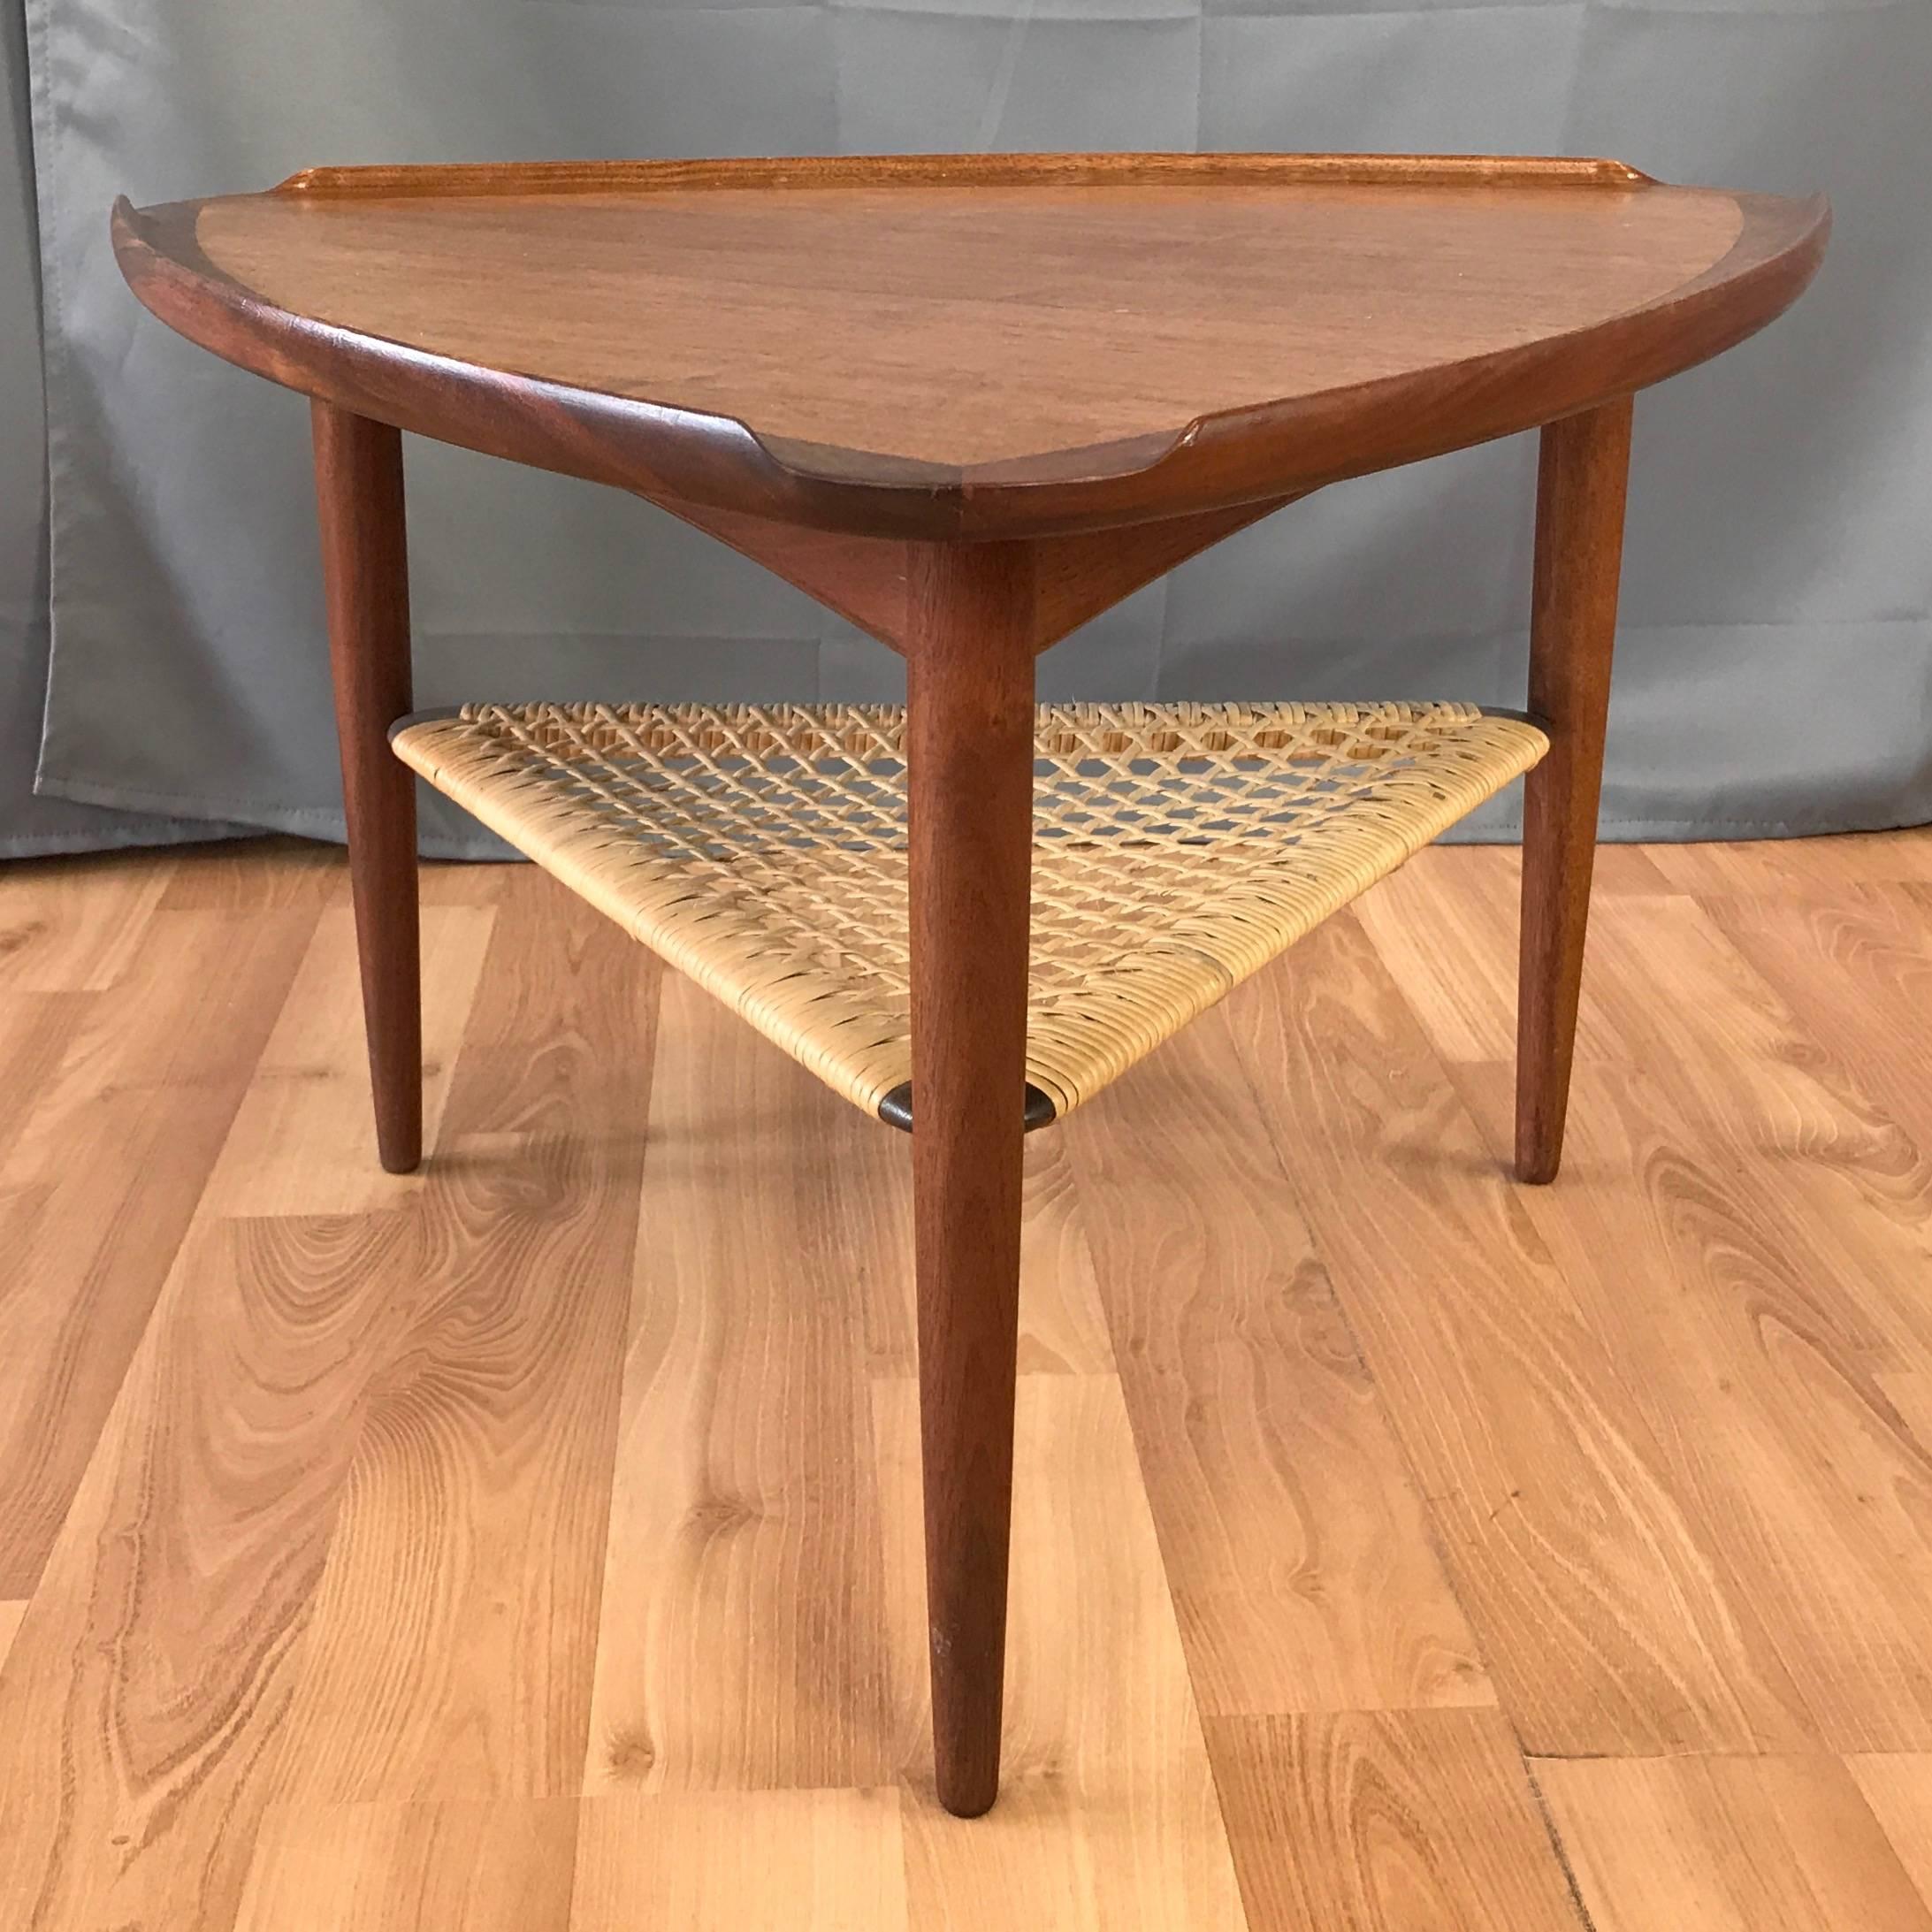 A model #17-15 “Wedge” table in teak with woven cane shelf by Ib Kofod-Larsen for Selig.

Classic Danish modern cocktail or side table with expertly crafted rounded triangular top featuring bookmatched grain and smoothly sculpted raised lip edges.